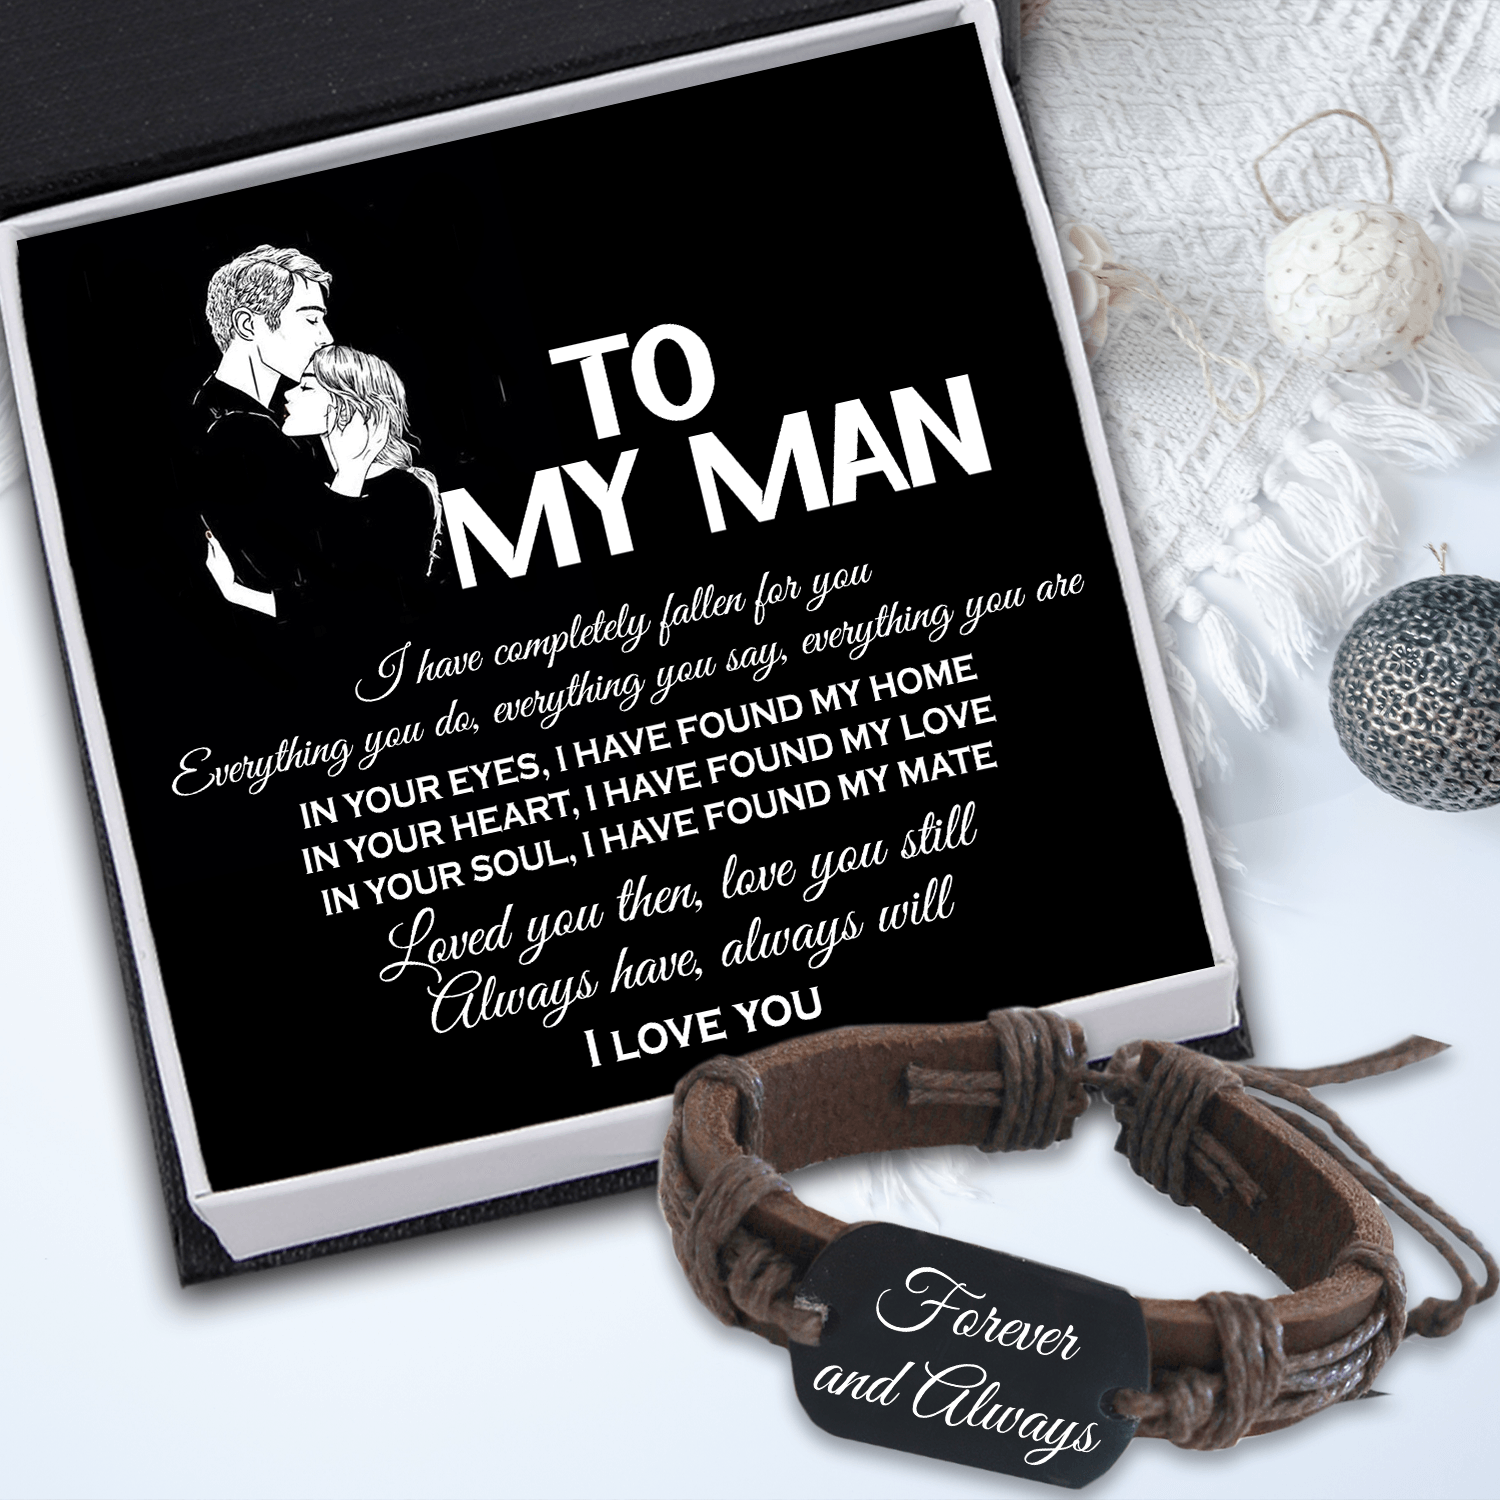 Leather Cord Bracelet - Family - To My Man - I Have Completely Fallen For You - Augbr26001 - Gifts Holder